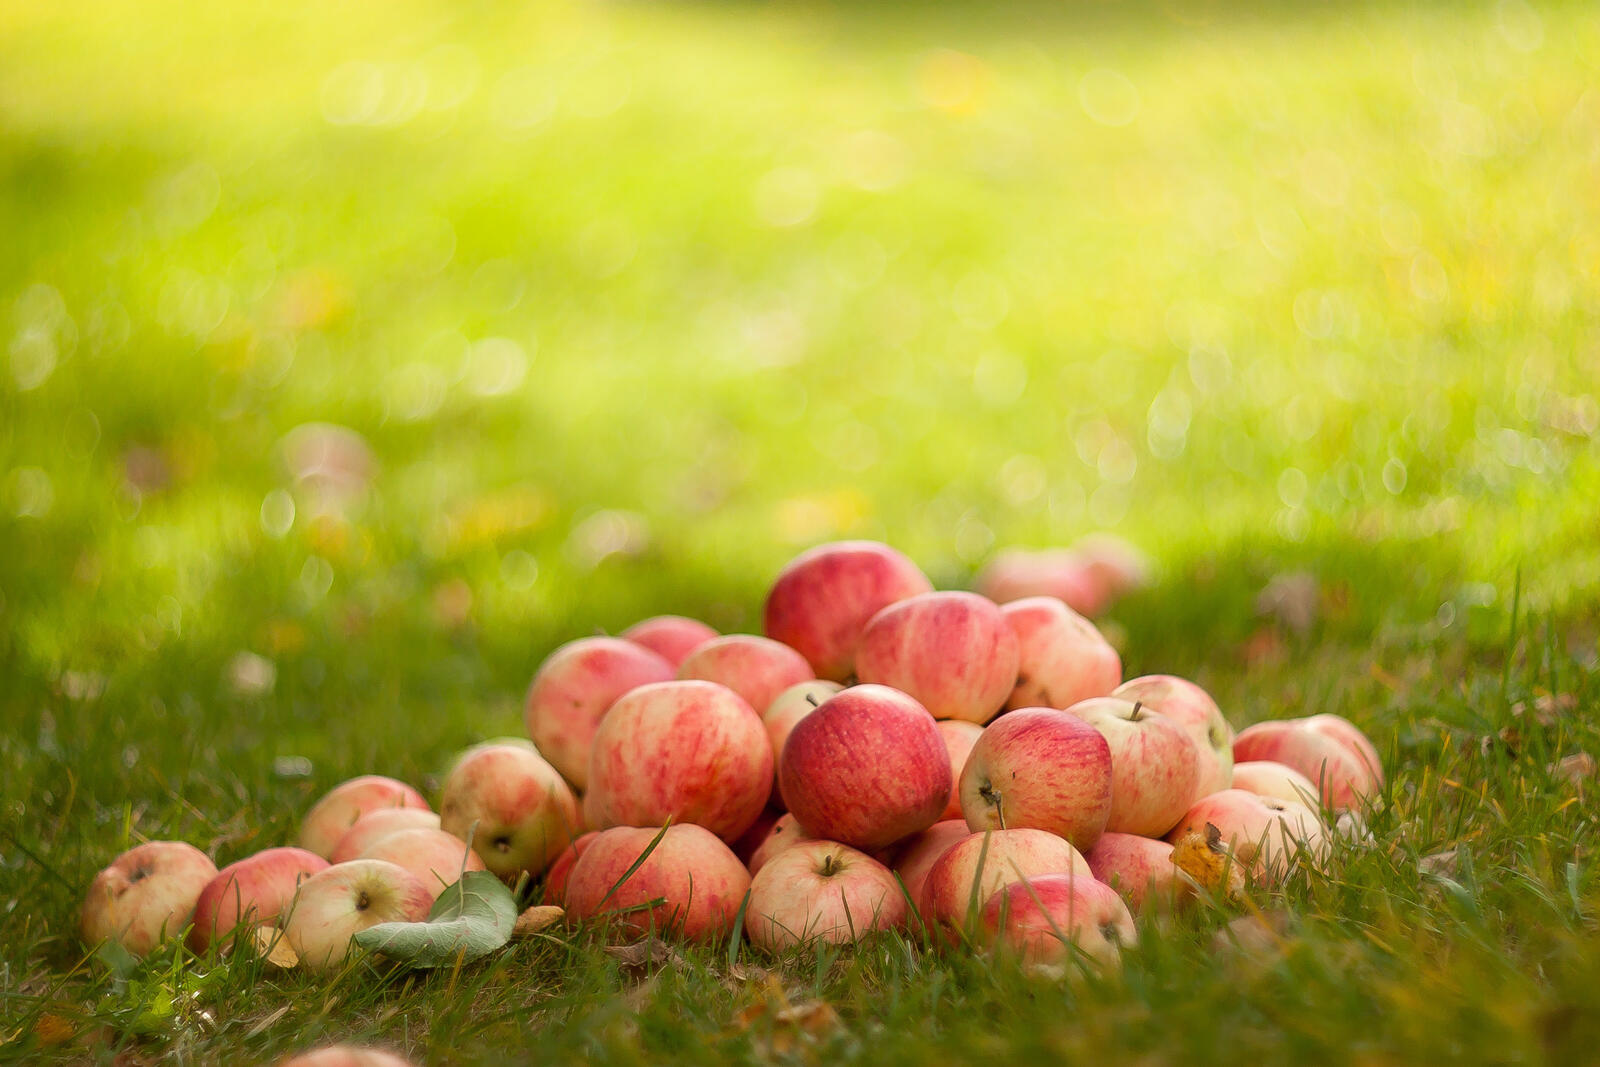 Free photo Apples on a grass court